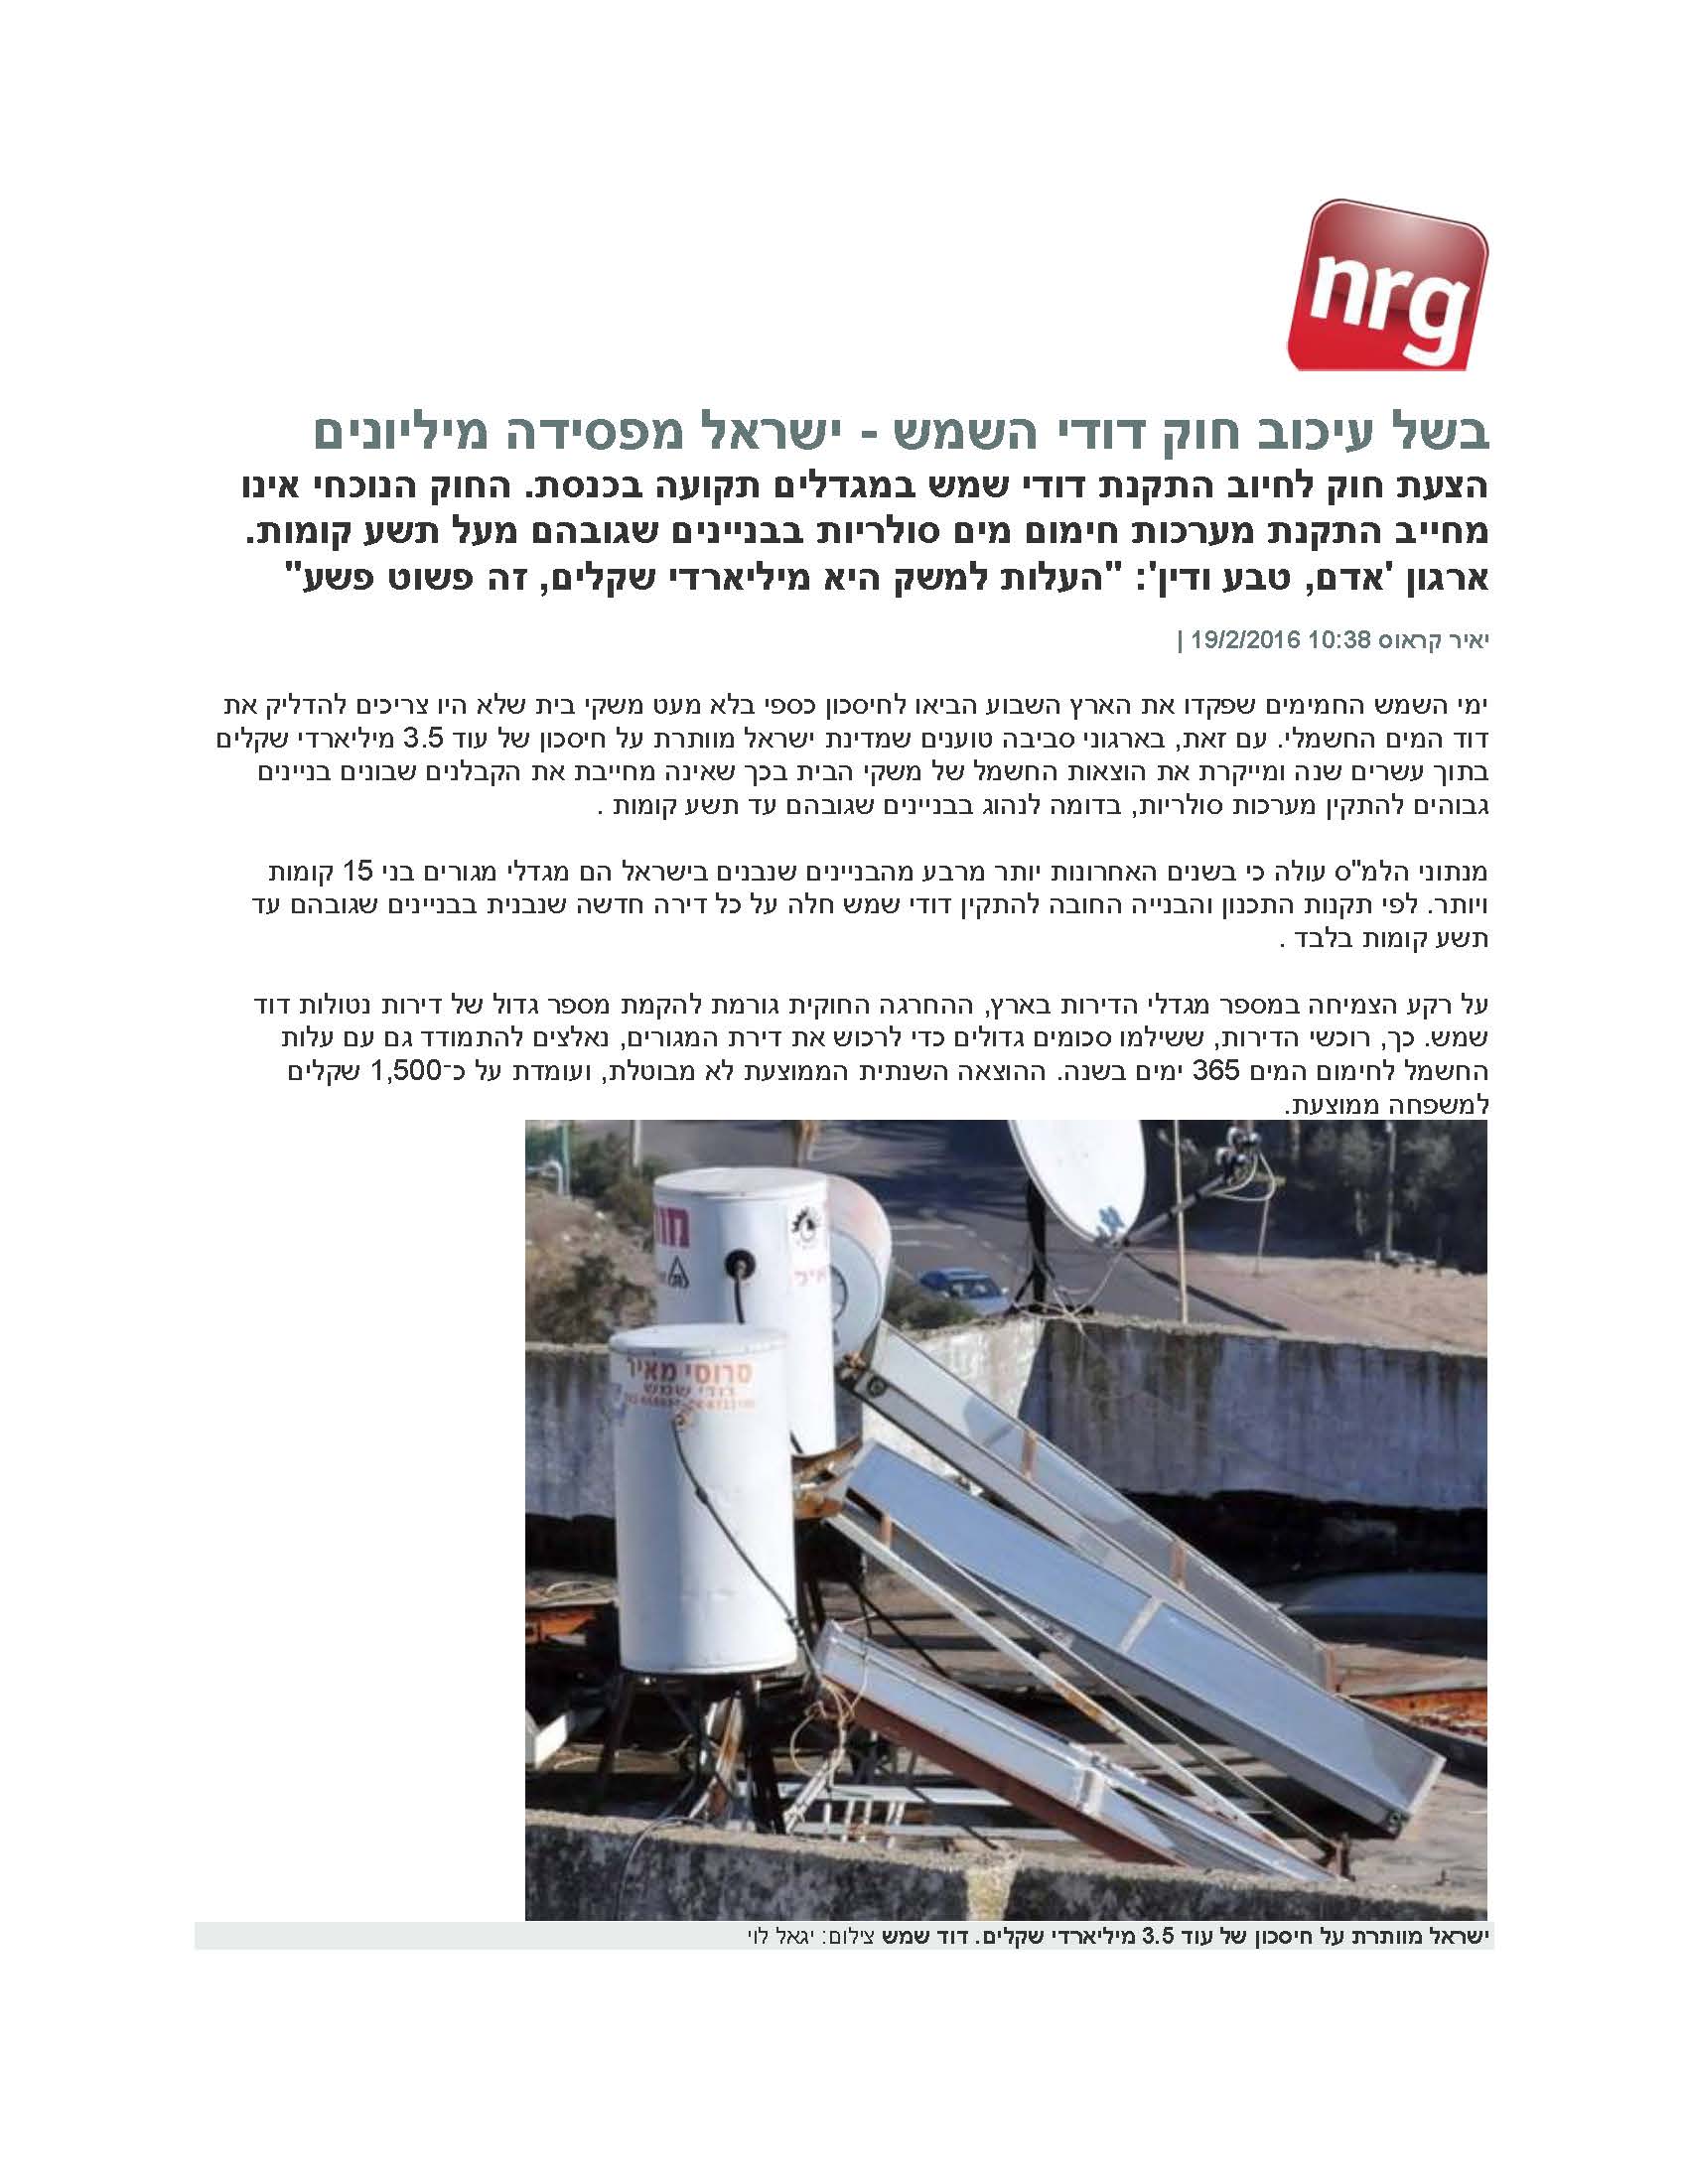 Due to a delay in the solar water heaters Law - Israel is losing millions